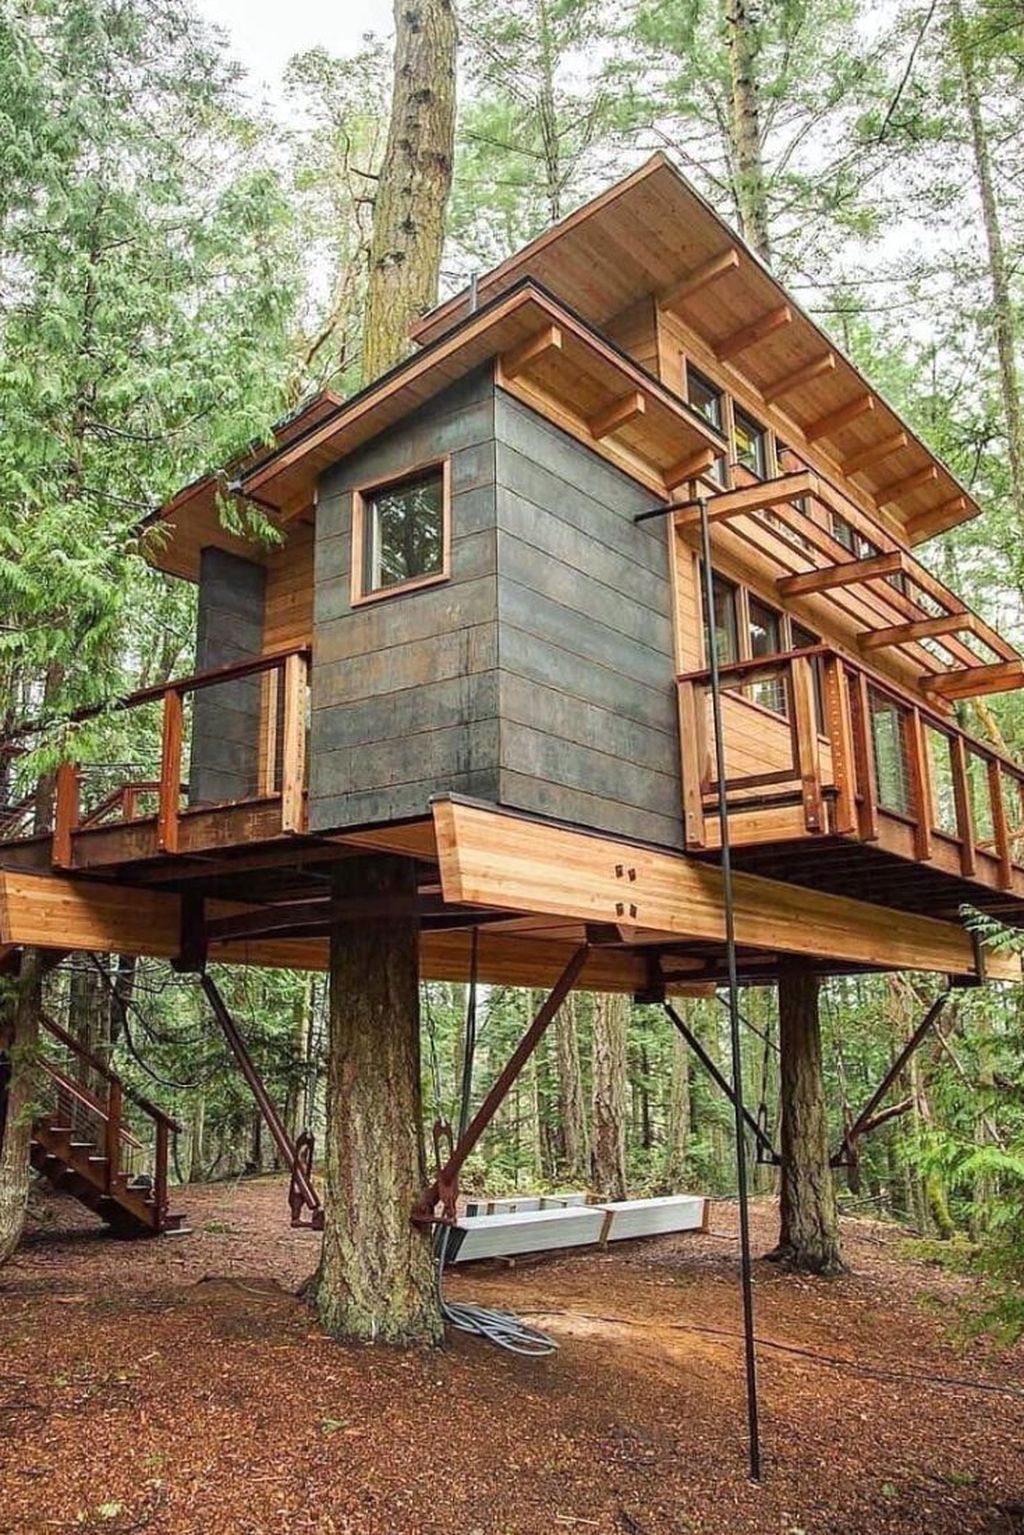 Stunning Tree House Designs You Never Seen Before 06 